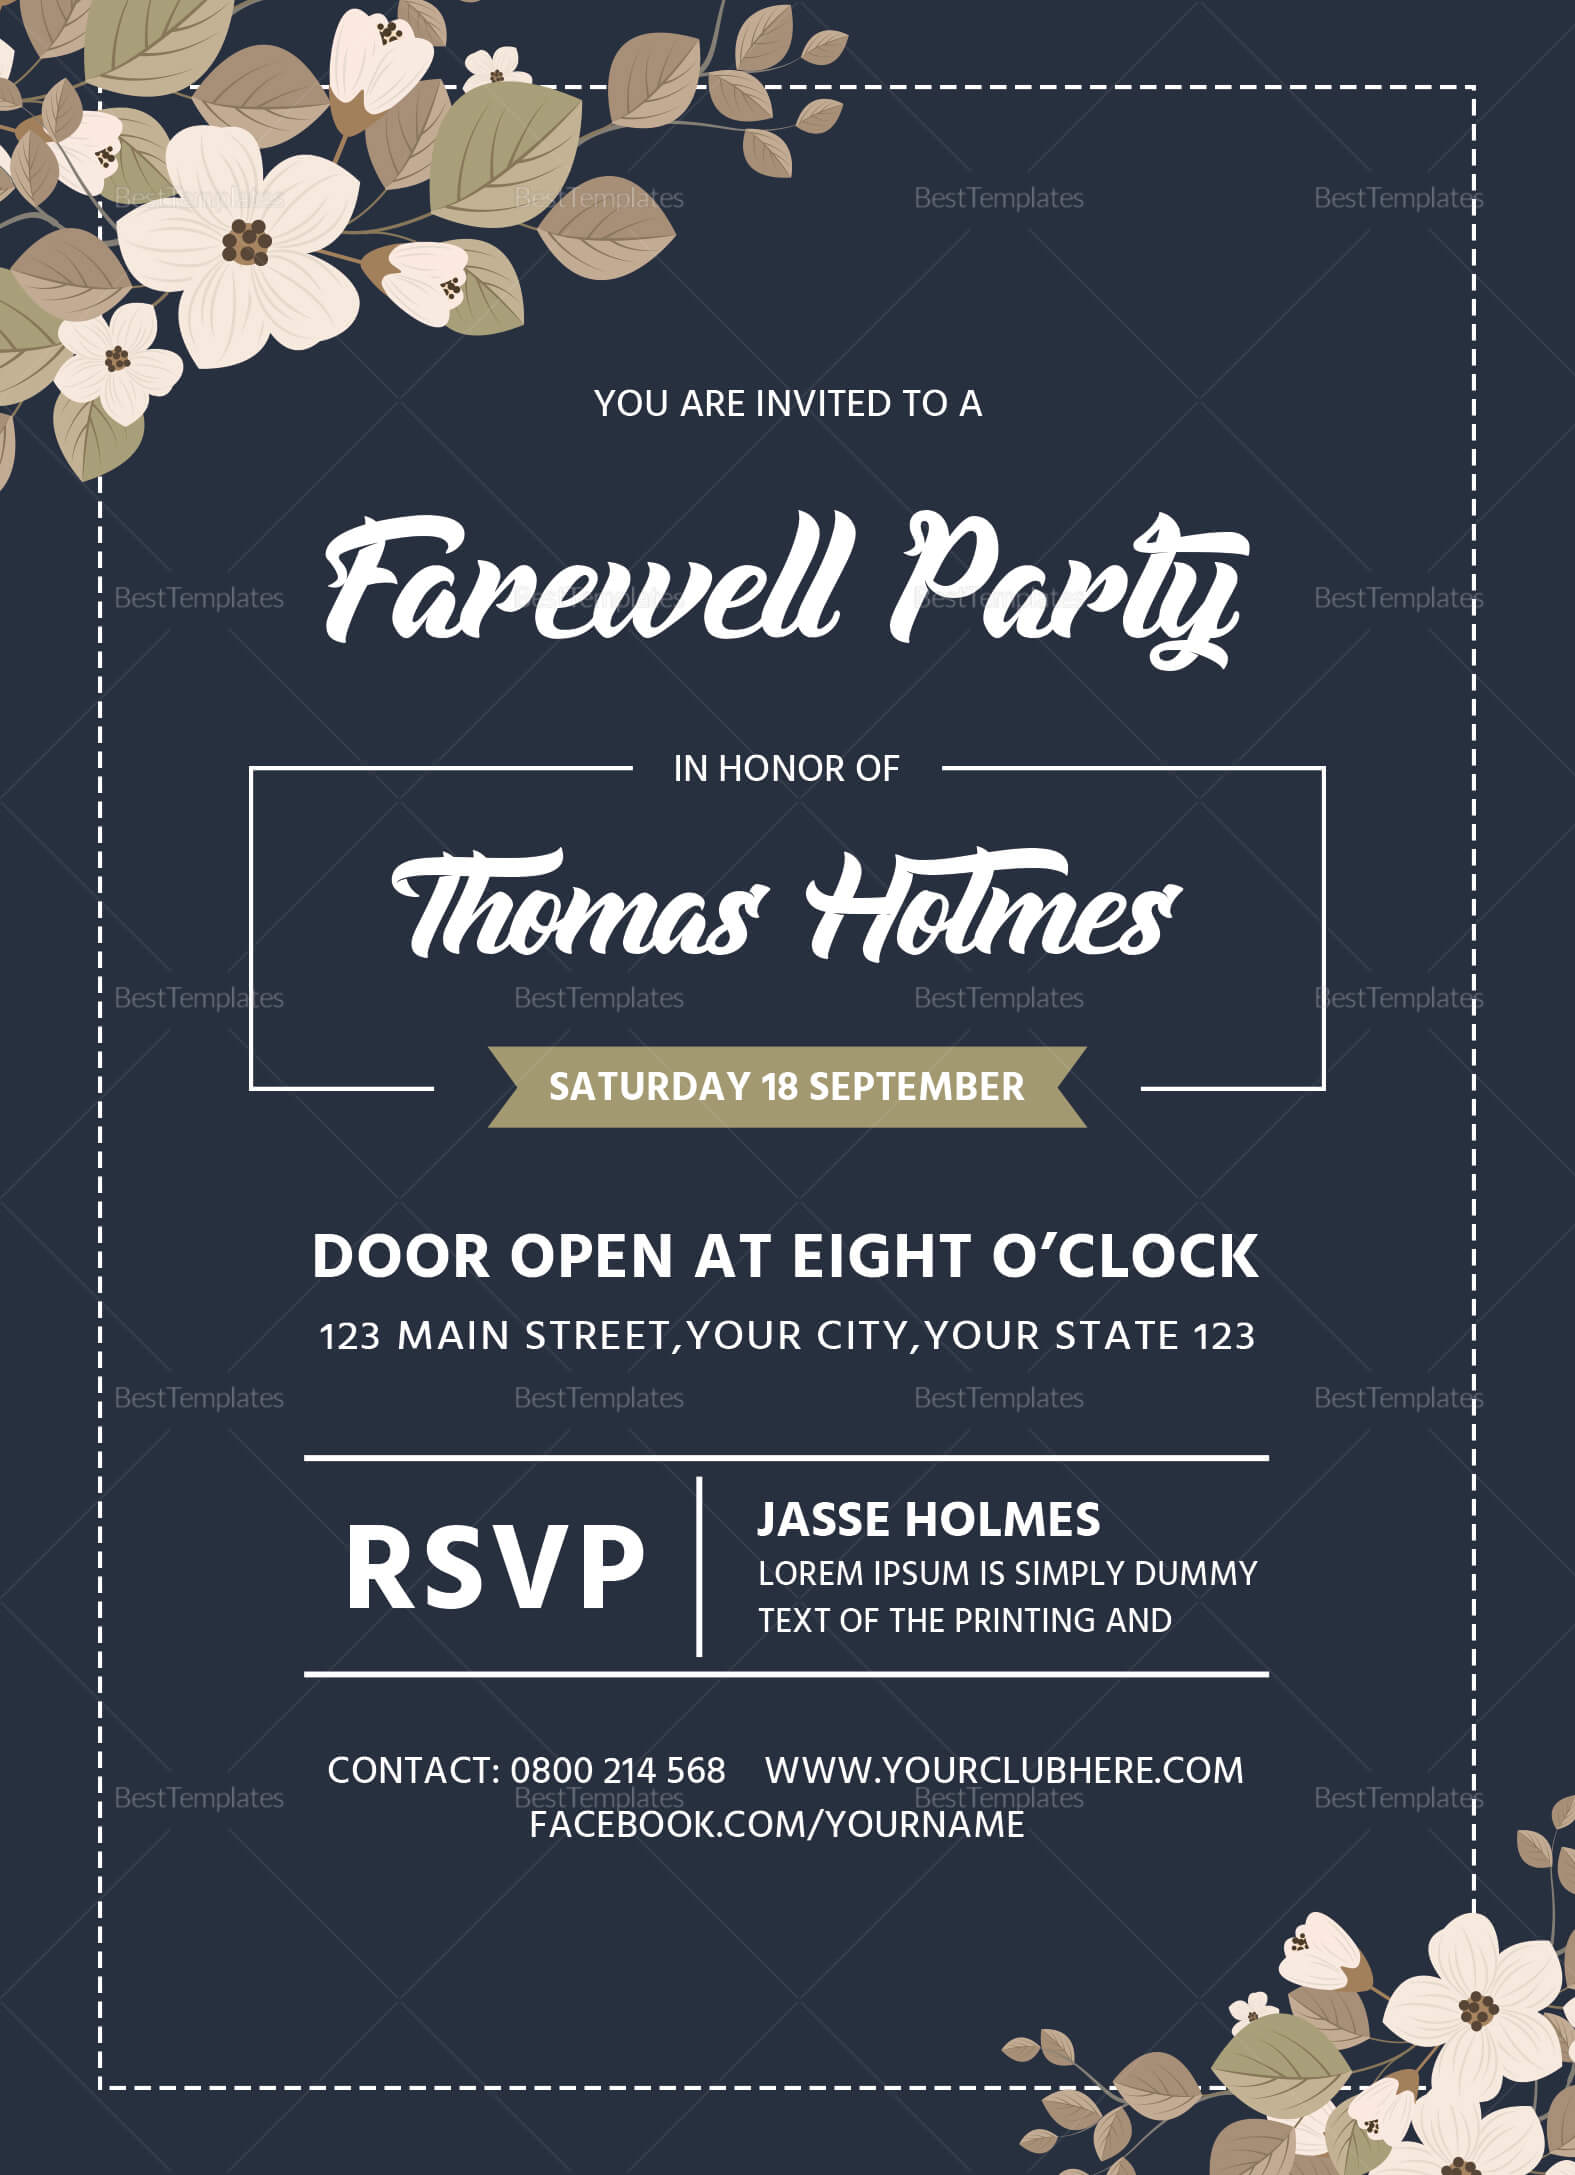 Farewell Party Invitation Card Template Regarding Farewell Invitation Card Template